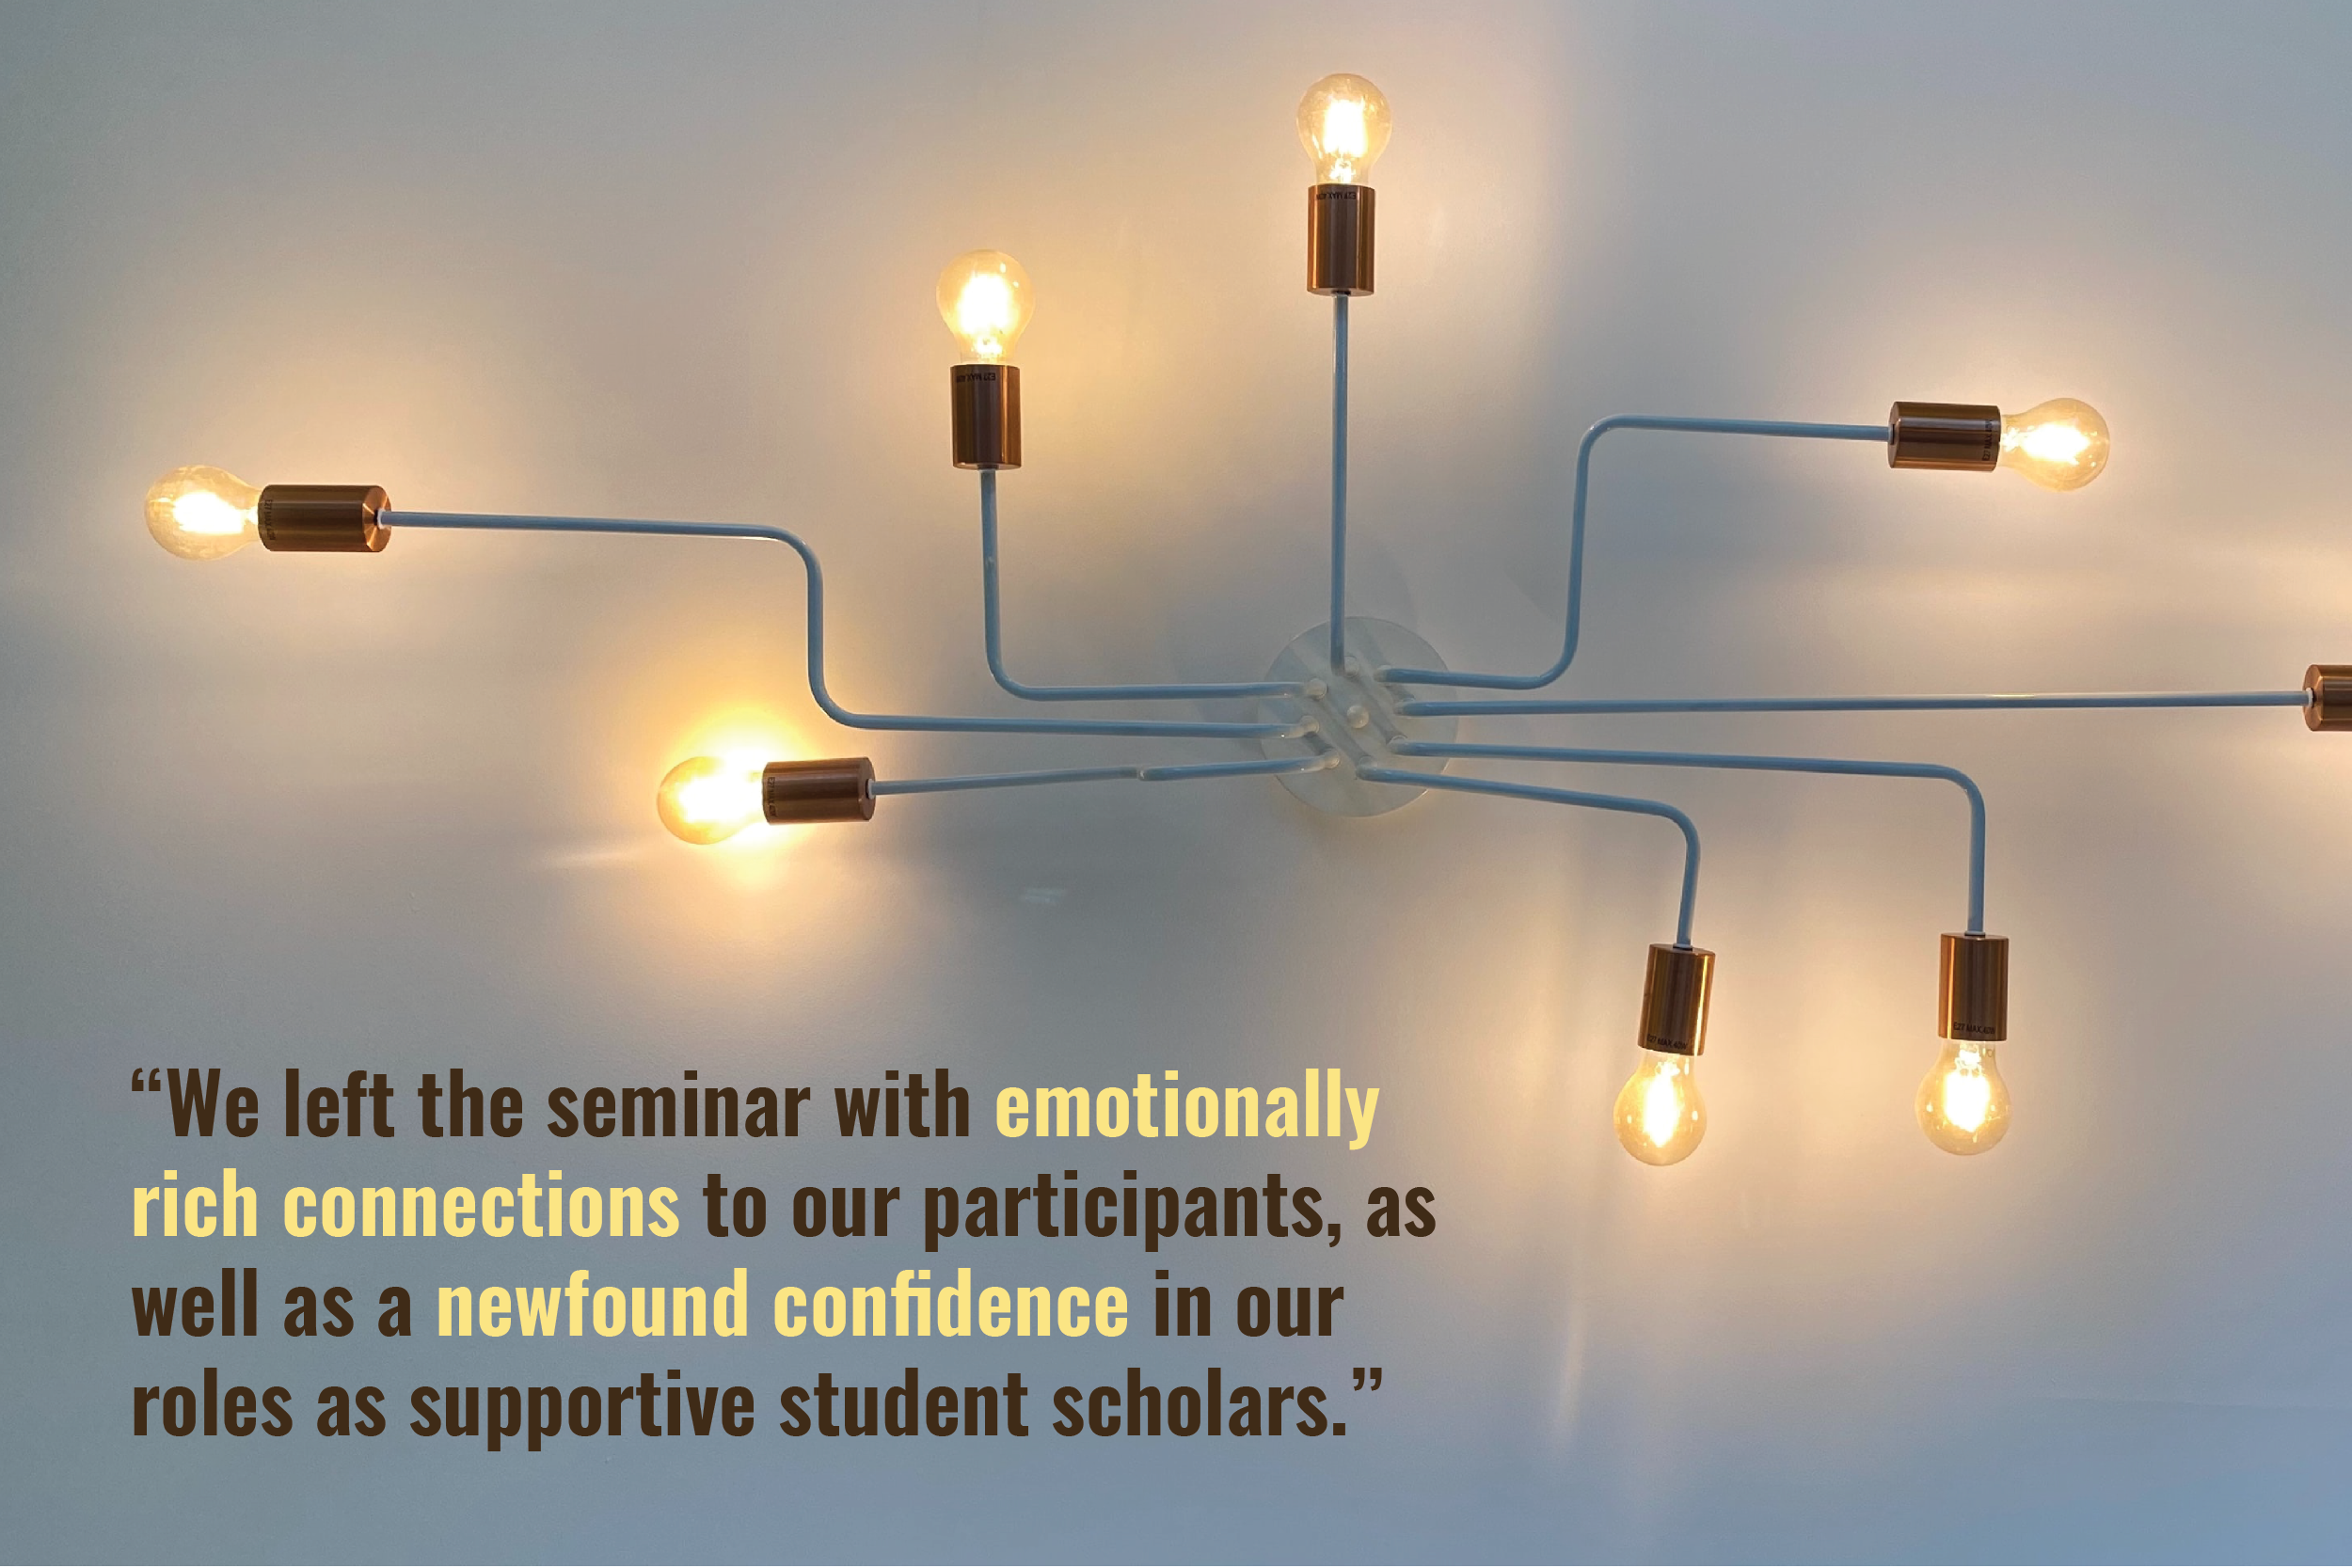 8 lightbulbs glow against a wall. Each lightbulb's cord winds together to a central hub. A quote reads "We left the seminar with emotionally rich connections to our participants, as well as a newfound confidence in our roles as supportive student scholars."